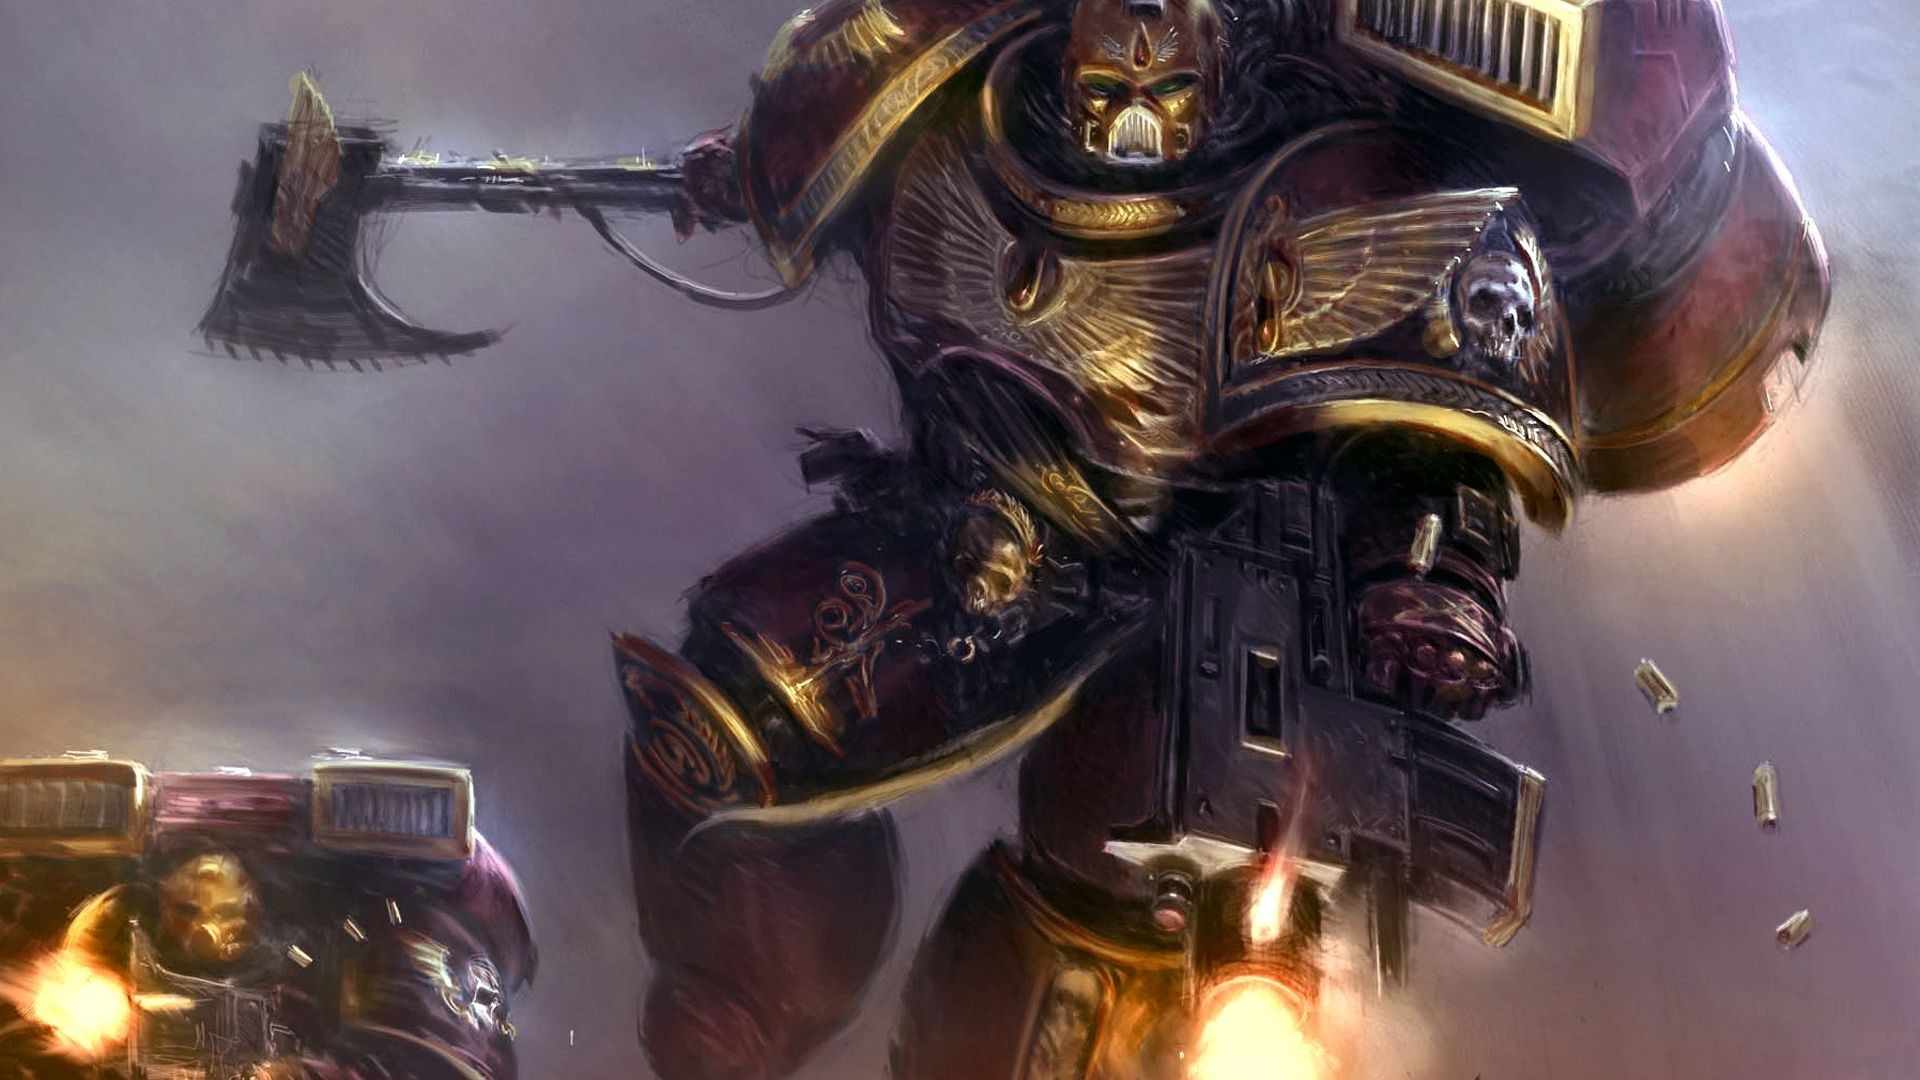 1920x1080 So you want to play Warhammer 40k? Pick an army!